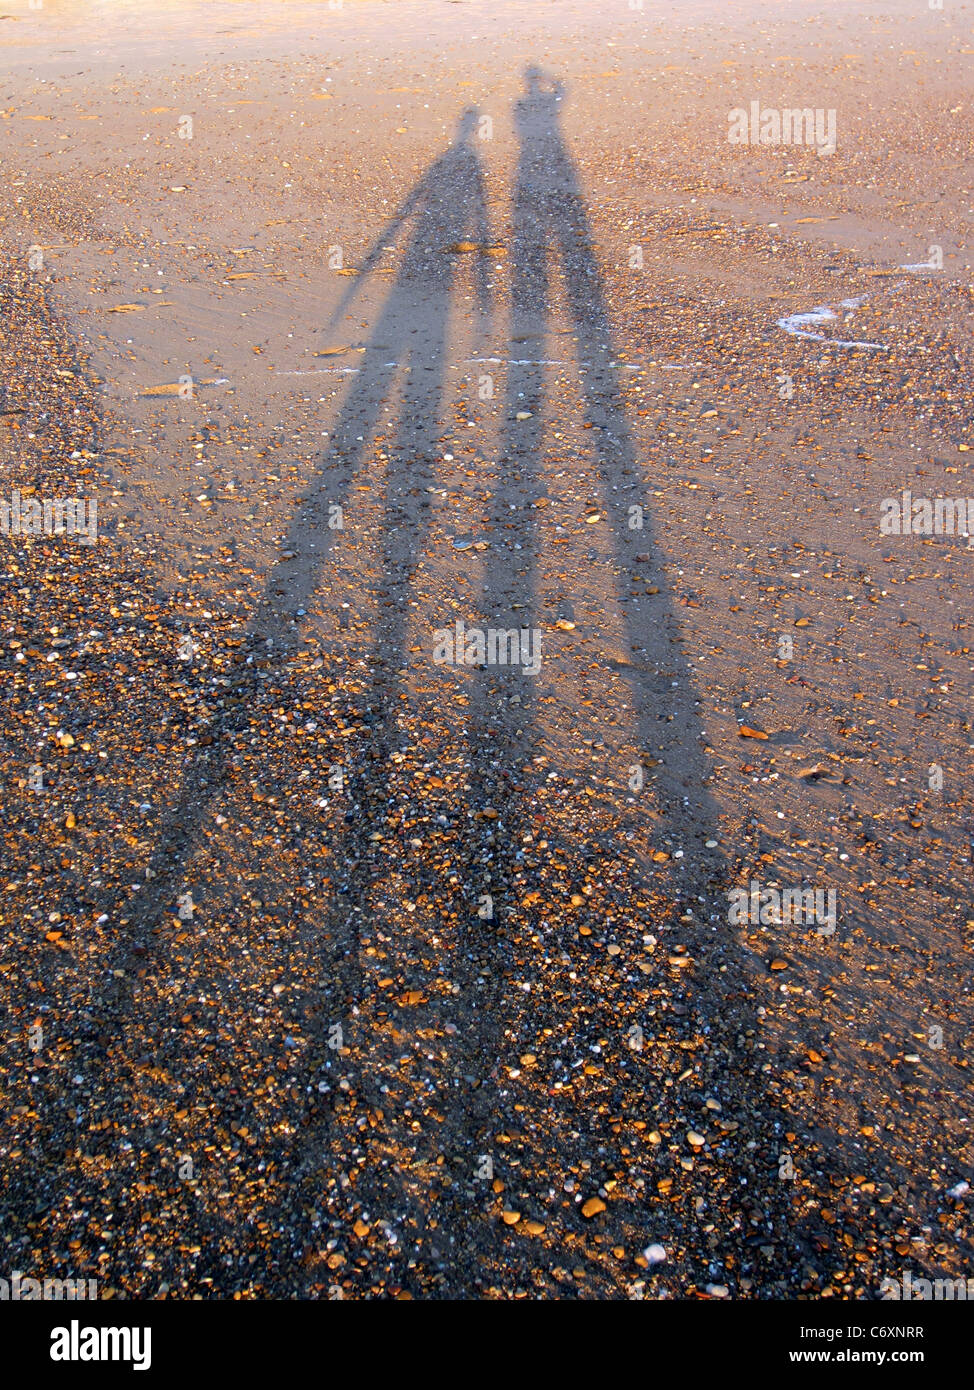 evening shadows on a beach showing long bodies and legs of two people Stock Photo